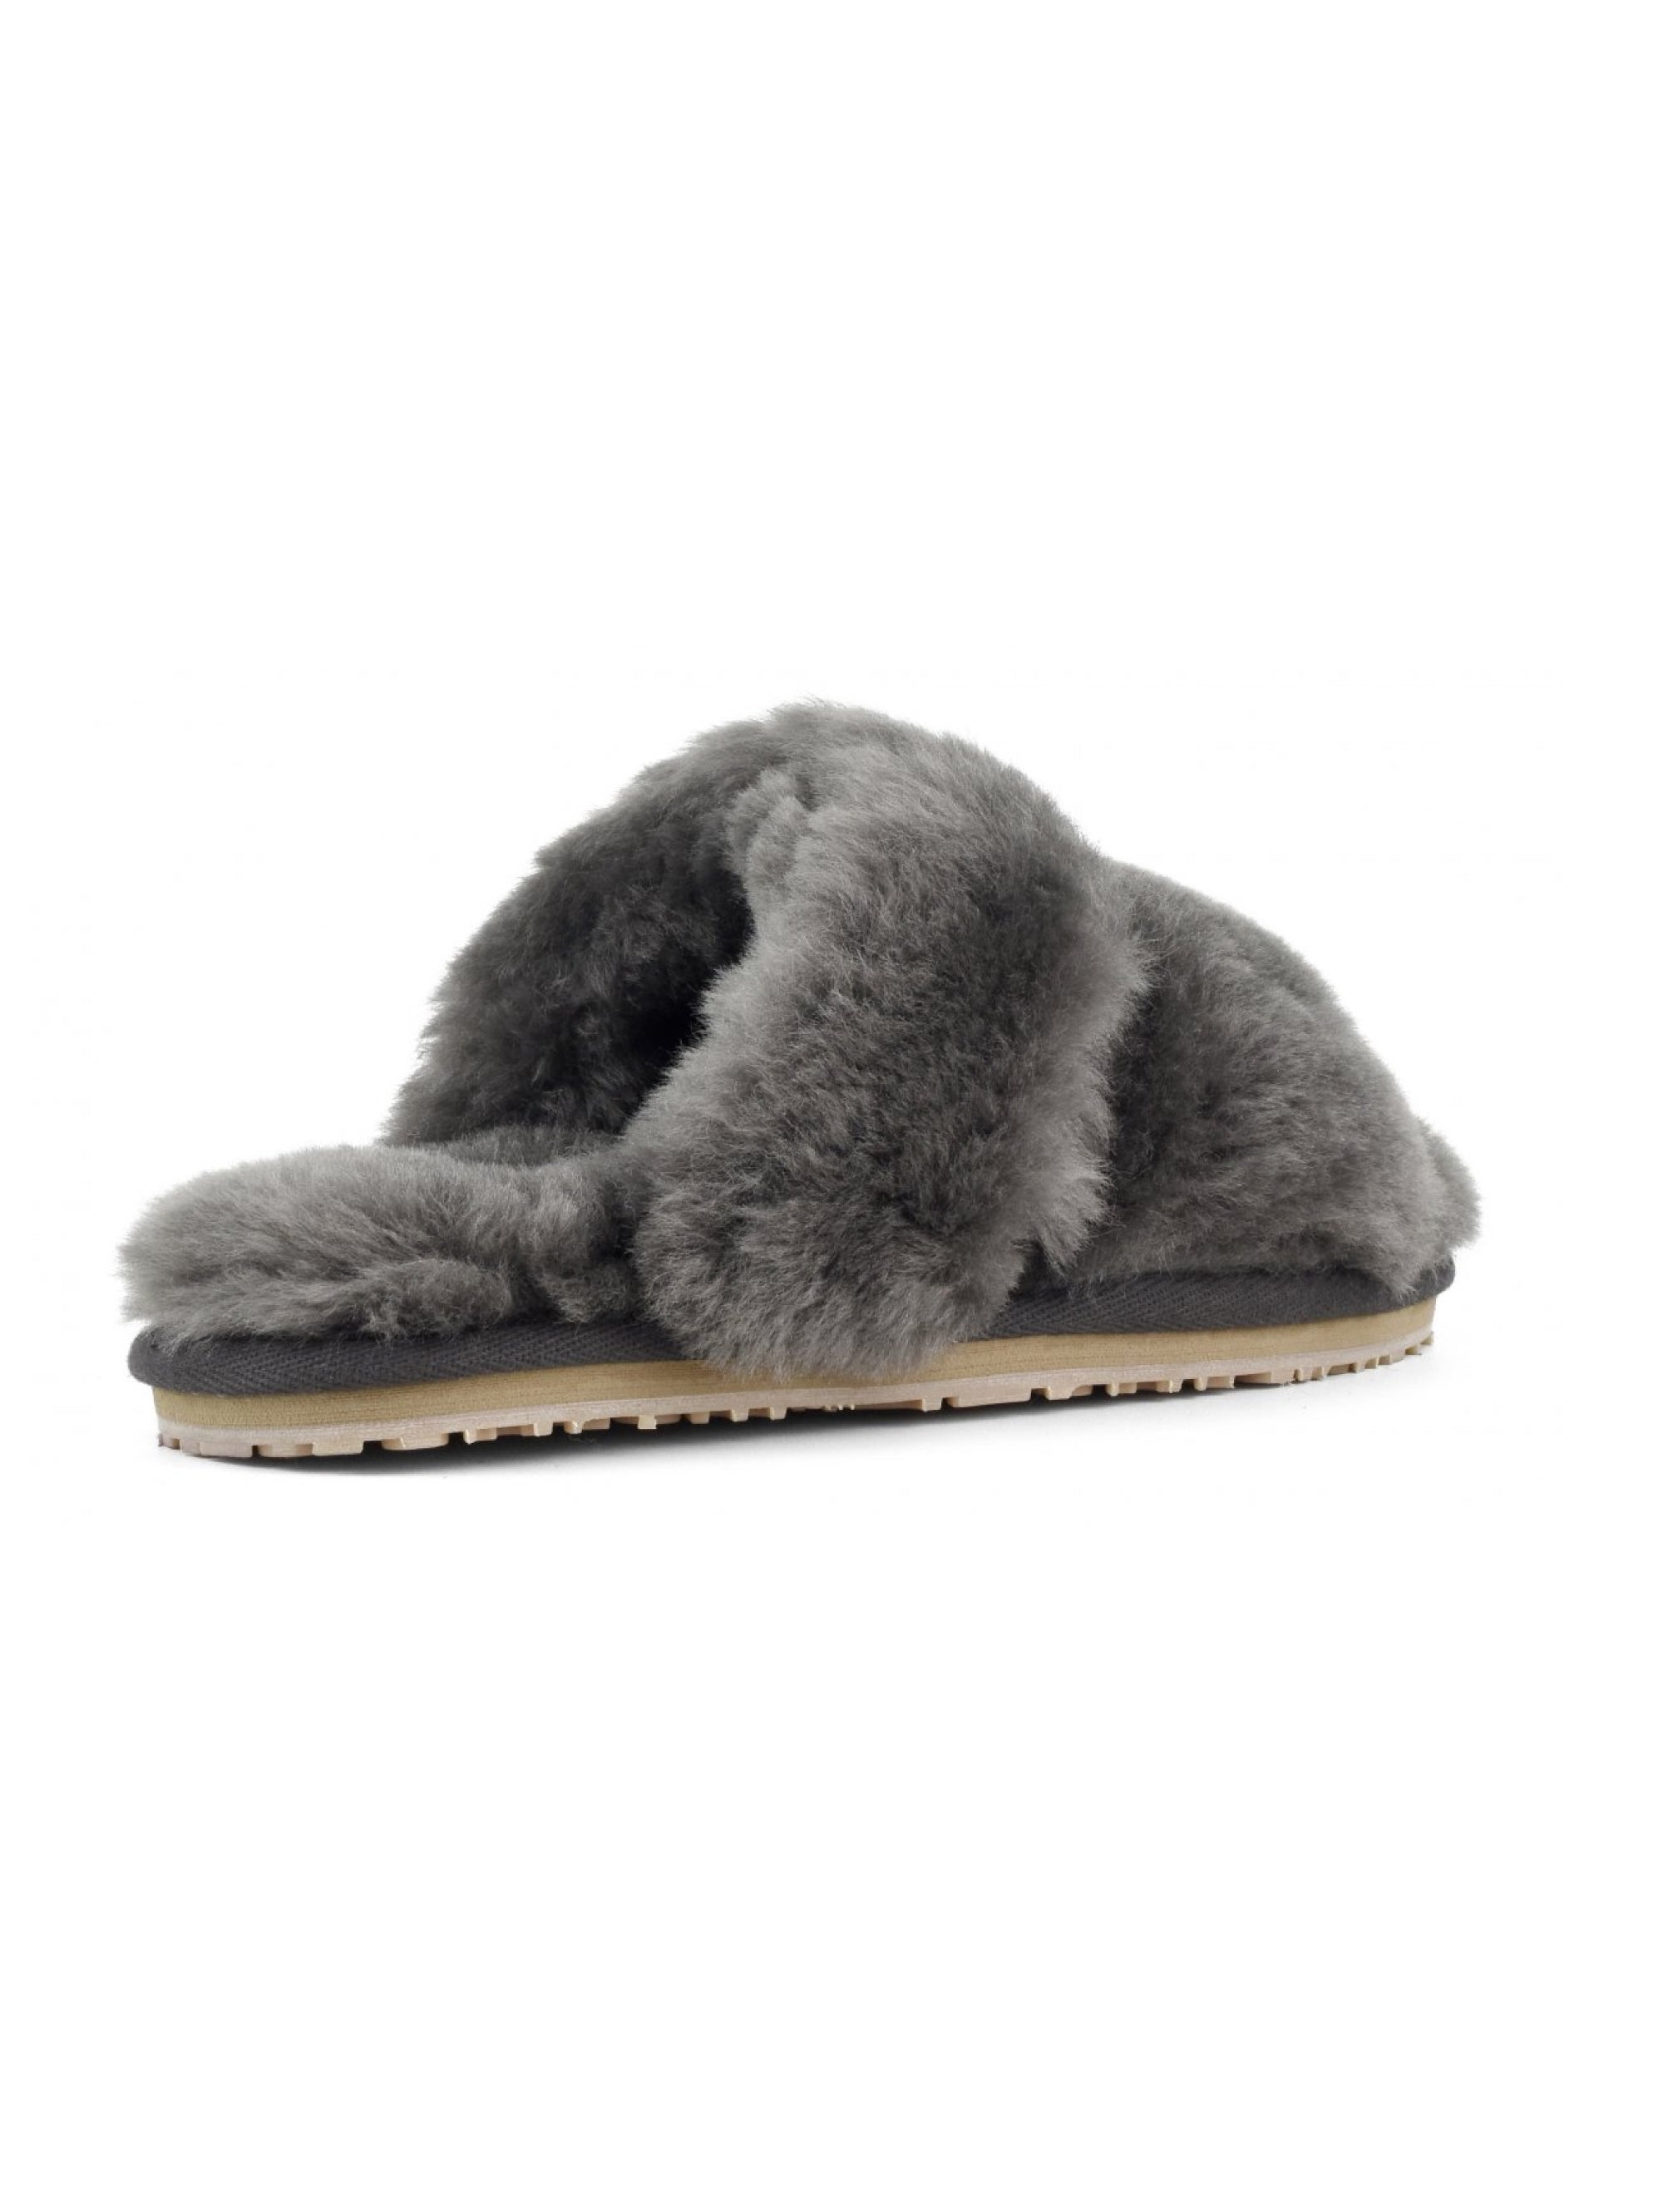 Sheepskin Slippers with Charcoal Bands